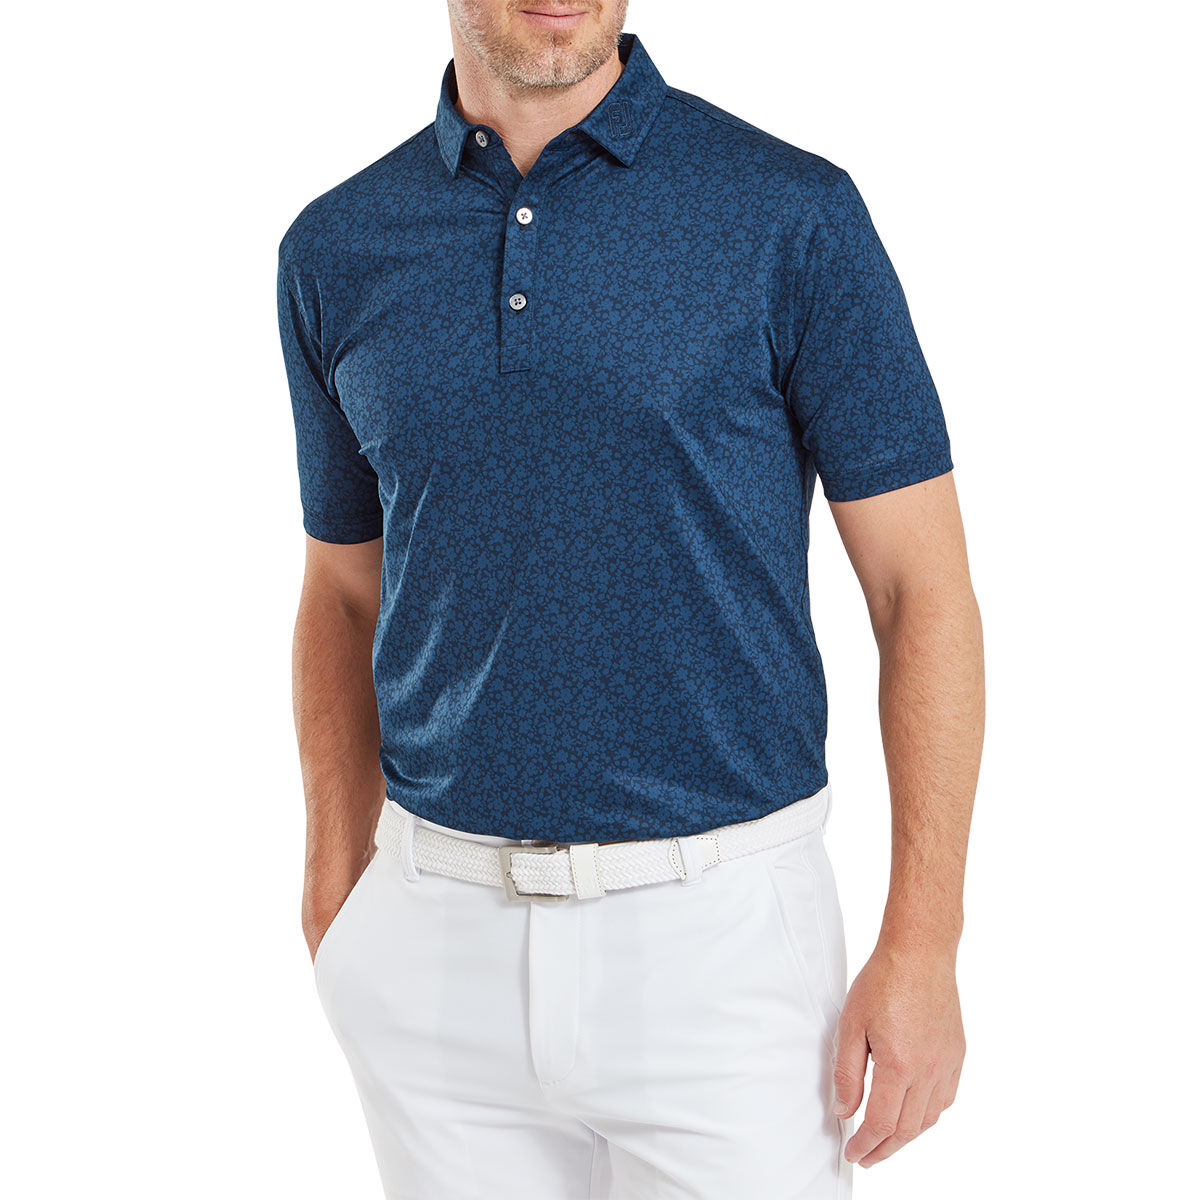 FootJoy Men’s Painted Floral Golf Polo Shirt, Mens, Navy blue, Small | American Golf